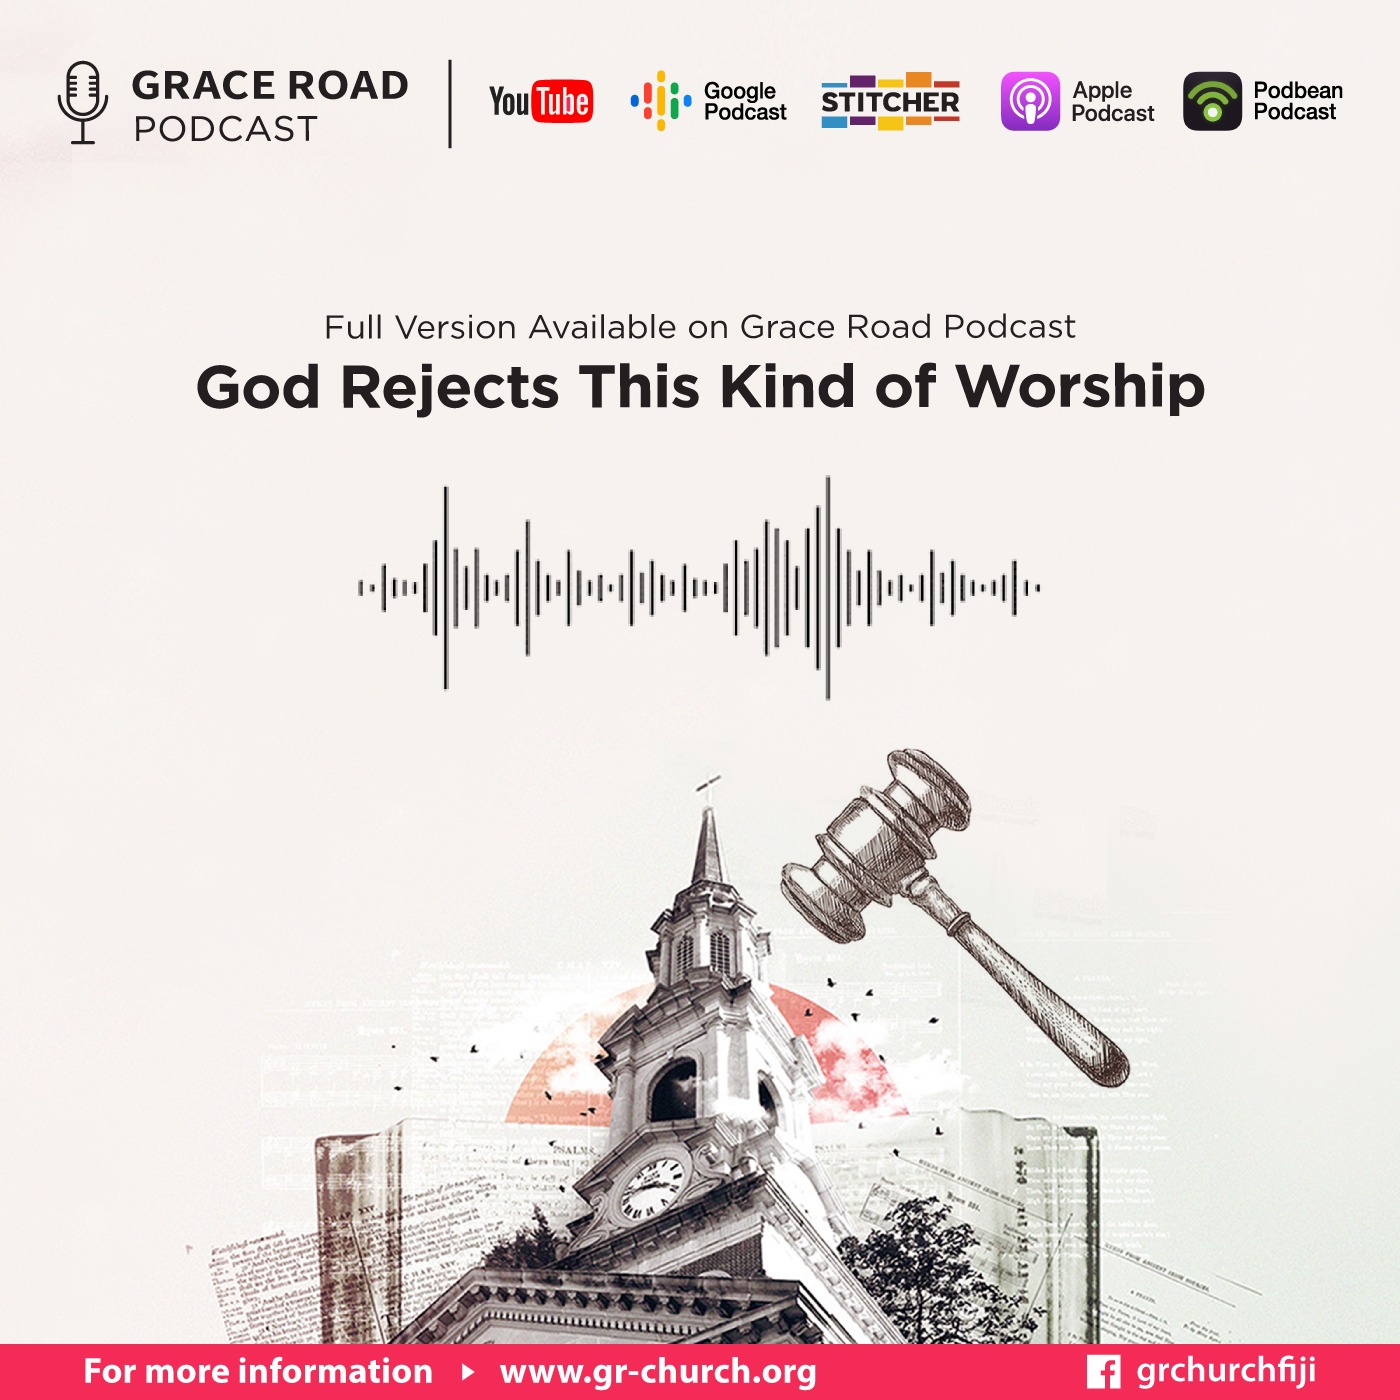 [Trailer] God Rejects This Kind of Worship